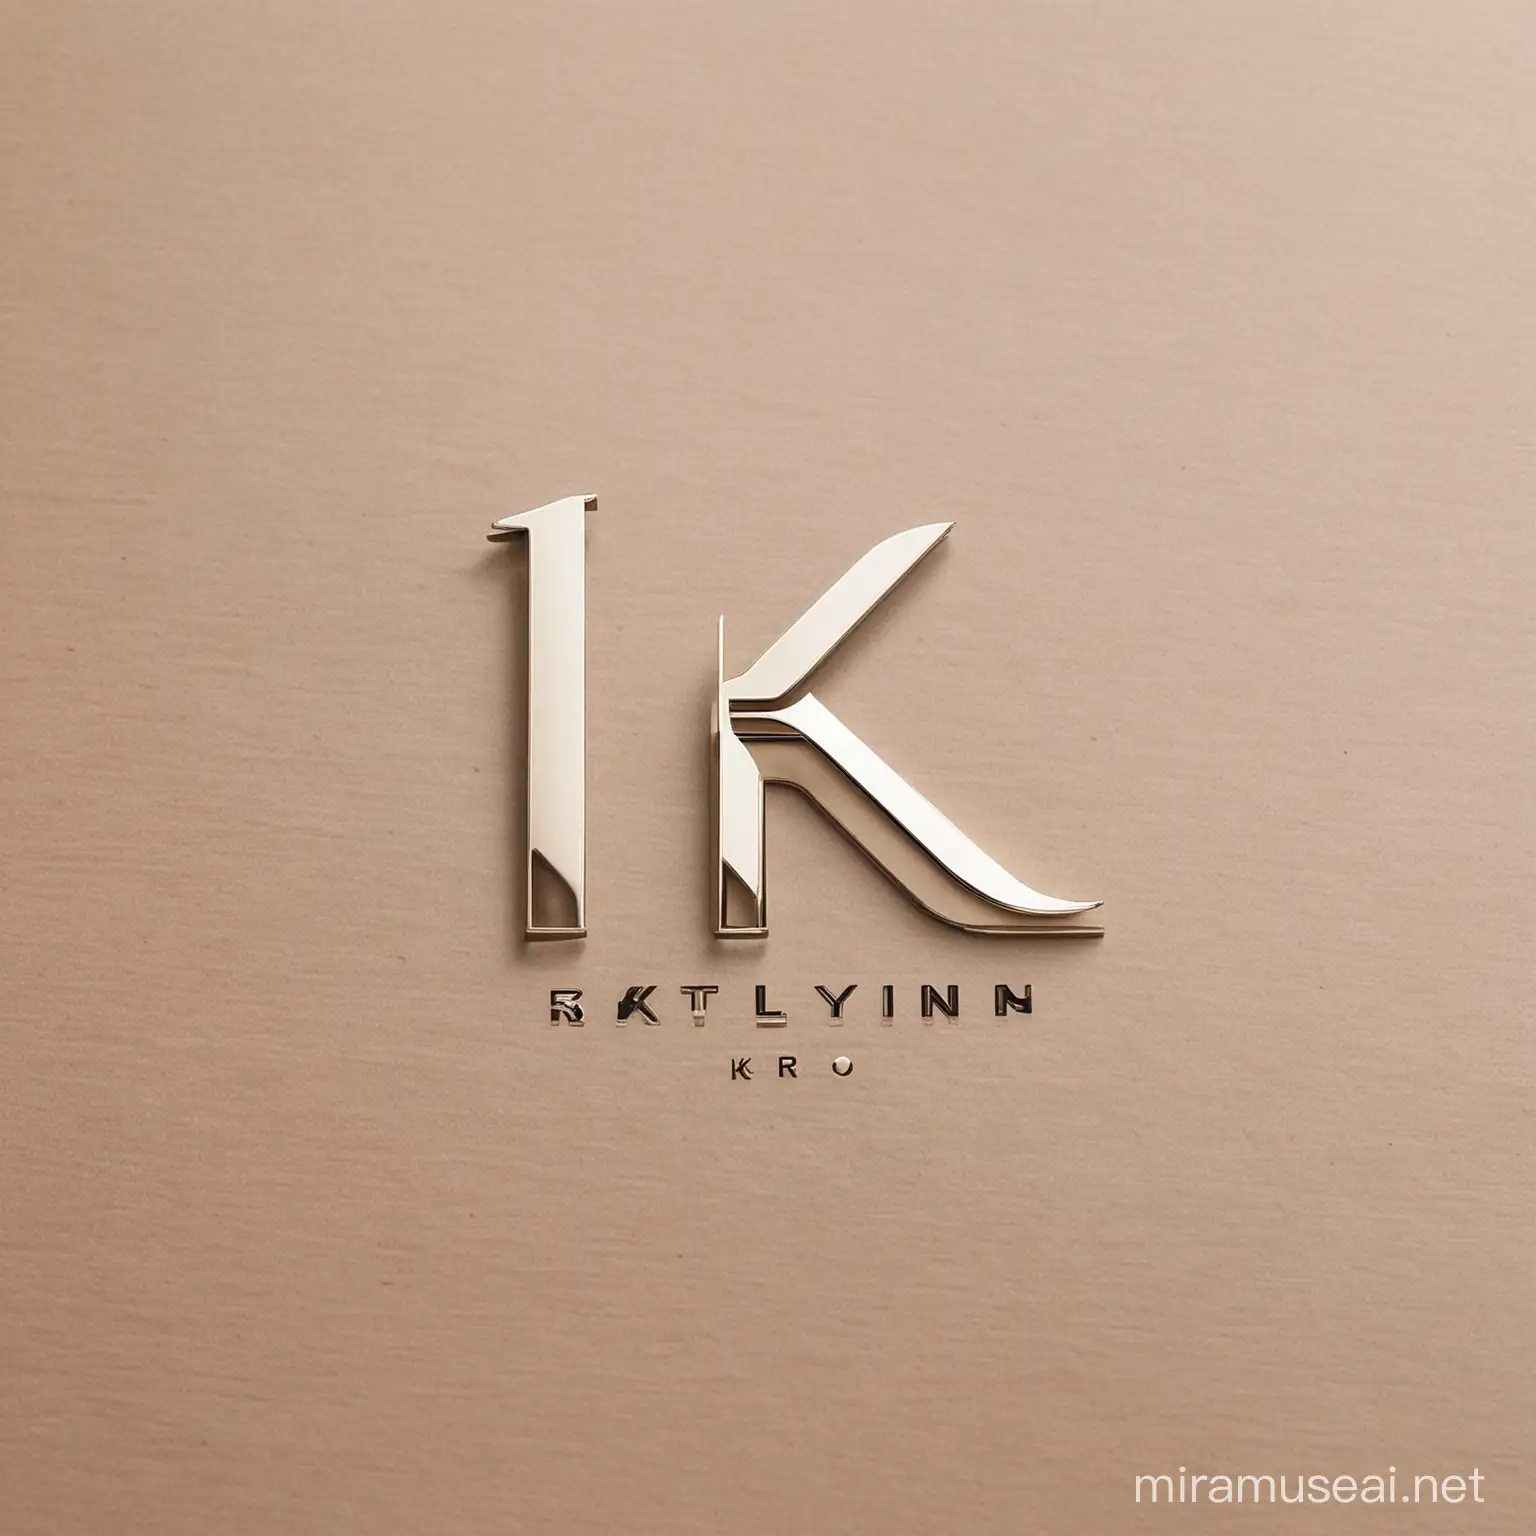 "Create a sleek and dynamic logo incorporating the initials 'KTR' for Katlyn, reflecting modernity and professionalism while capturing the essence of innovation and forward-thinking."